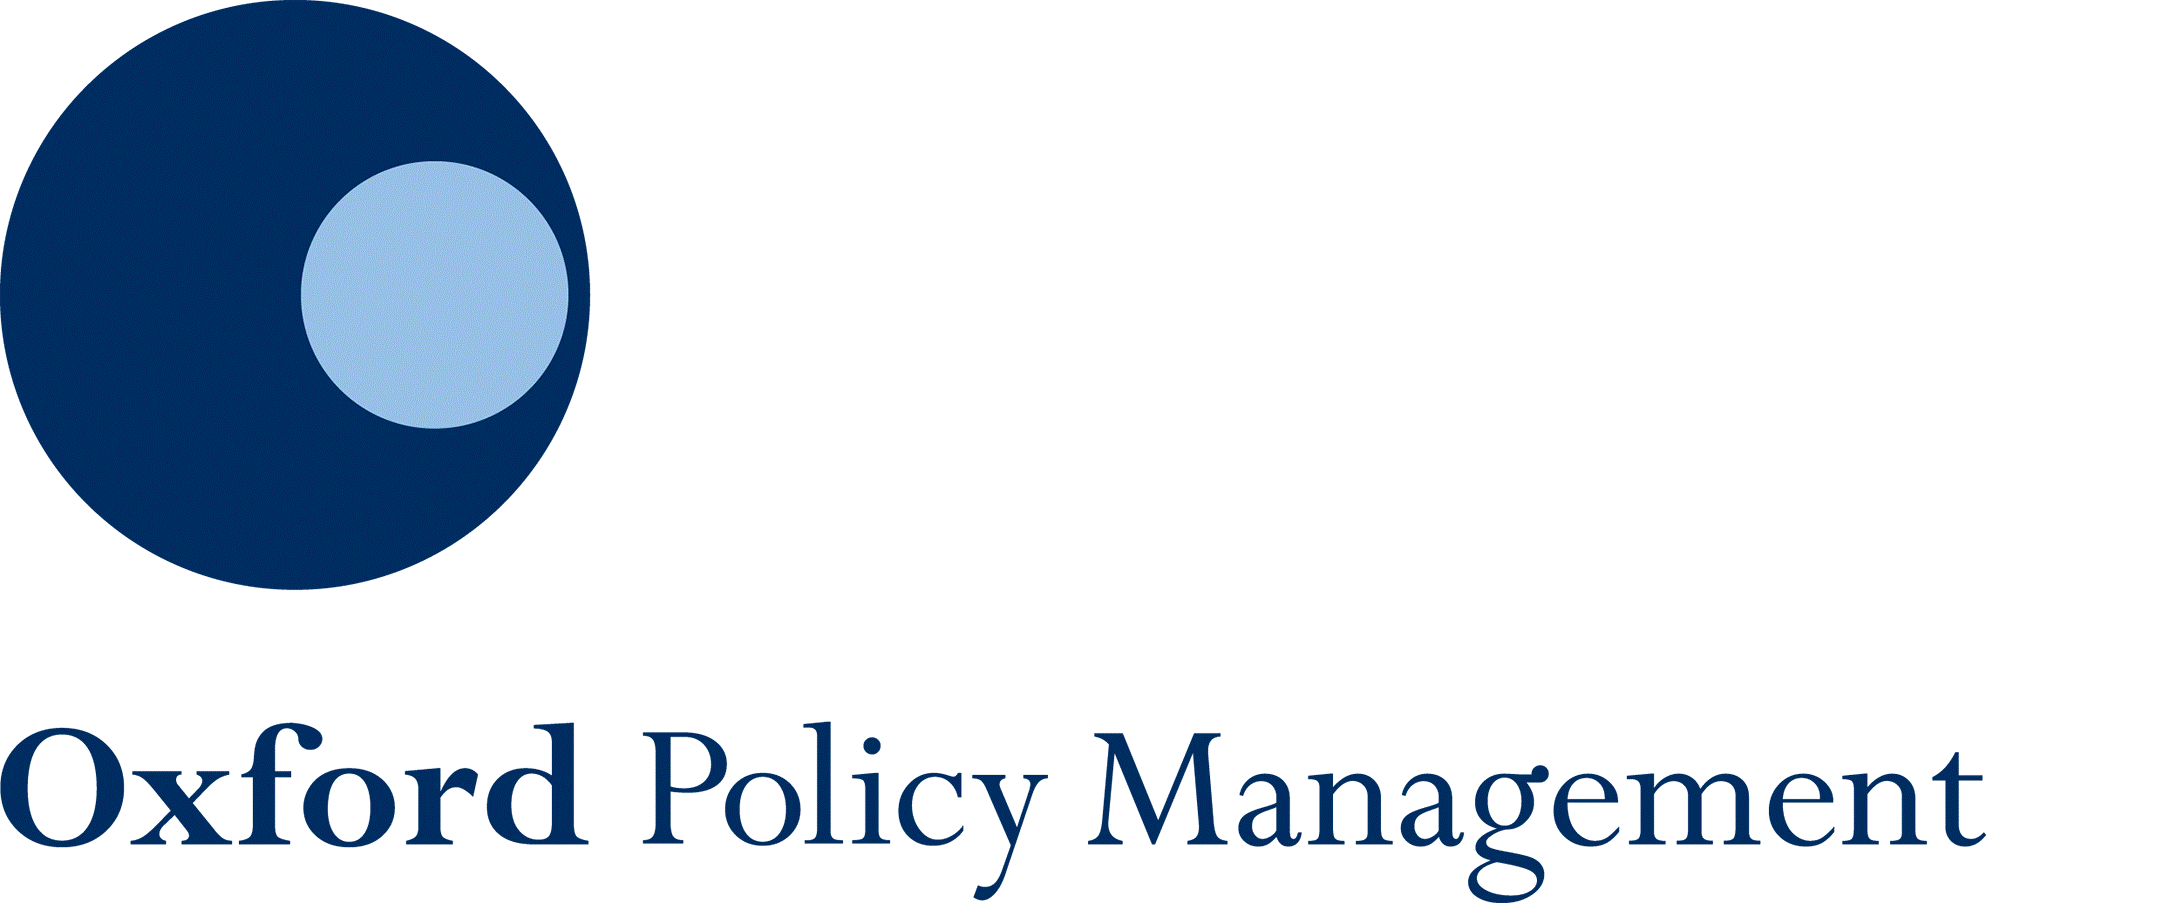 Oxford Policy Management (Royaume-Uni)